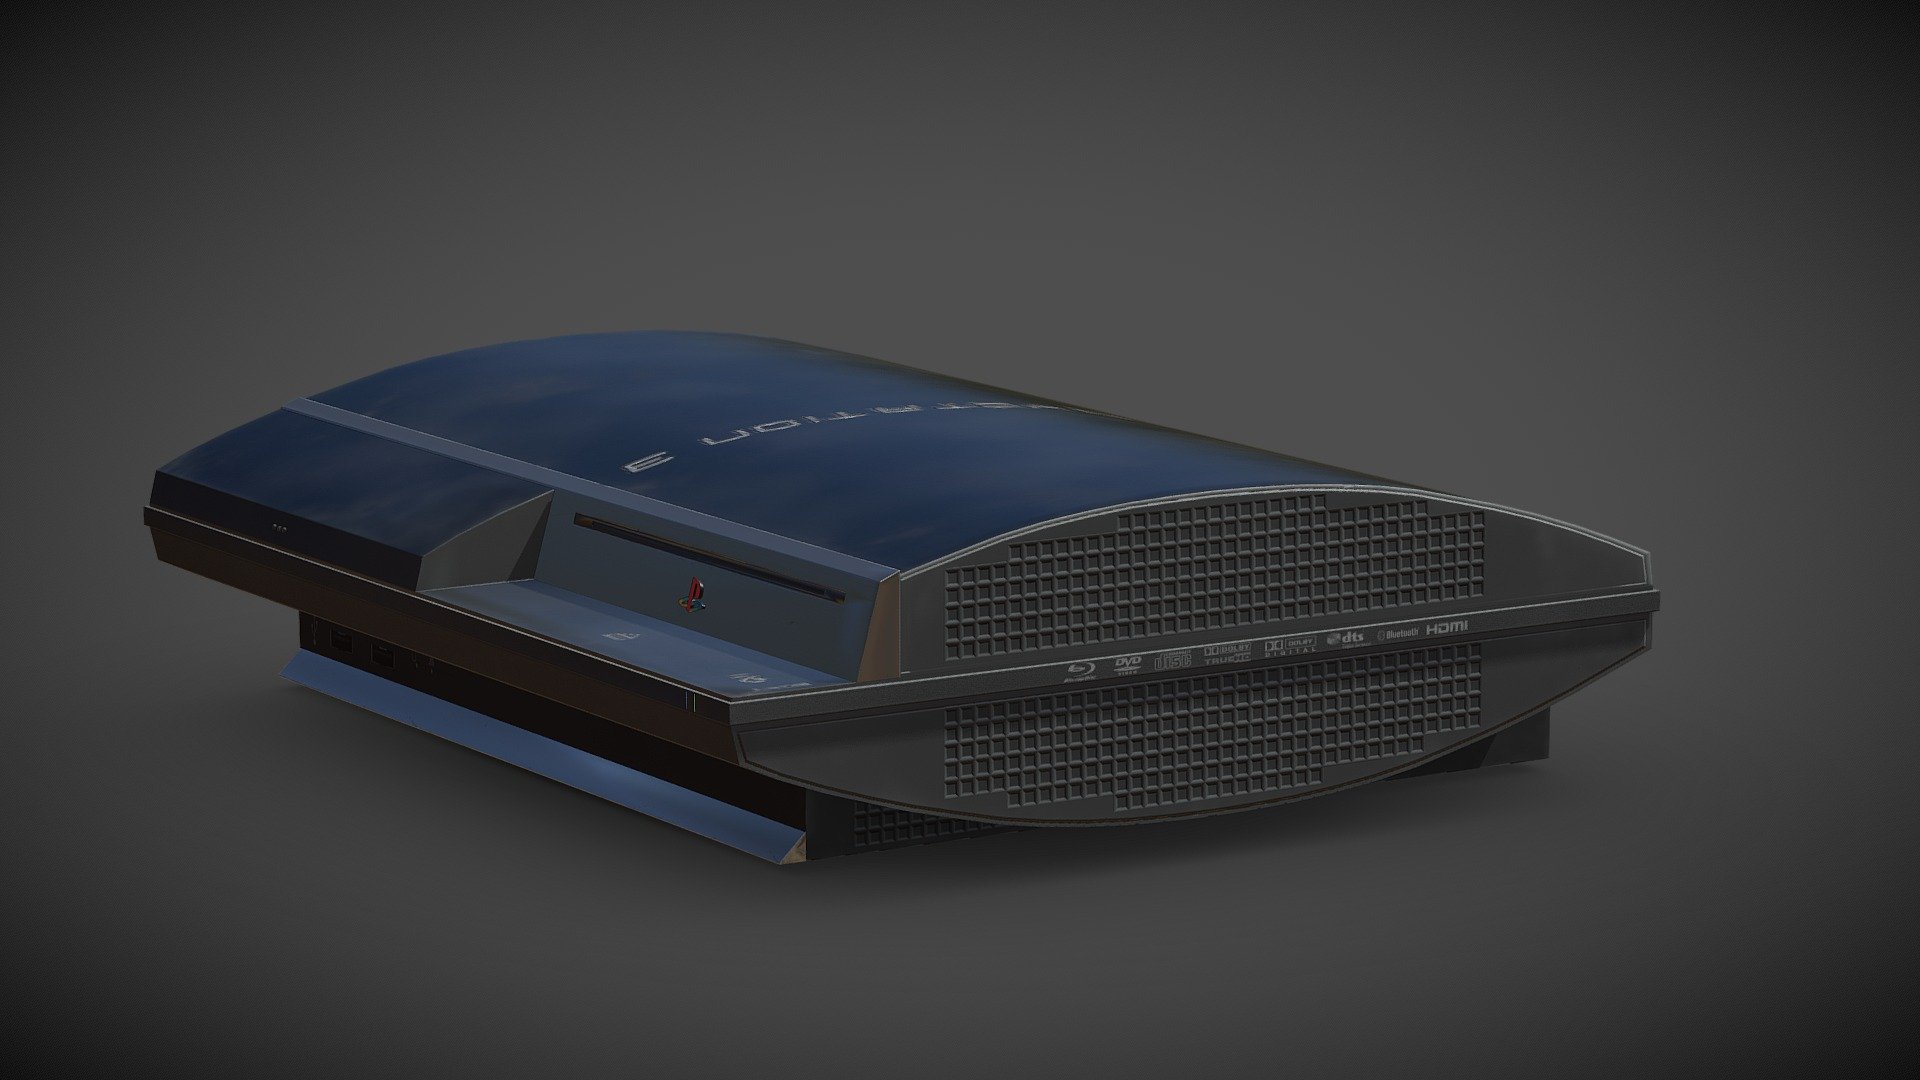 Playstation 3 console 3D model